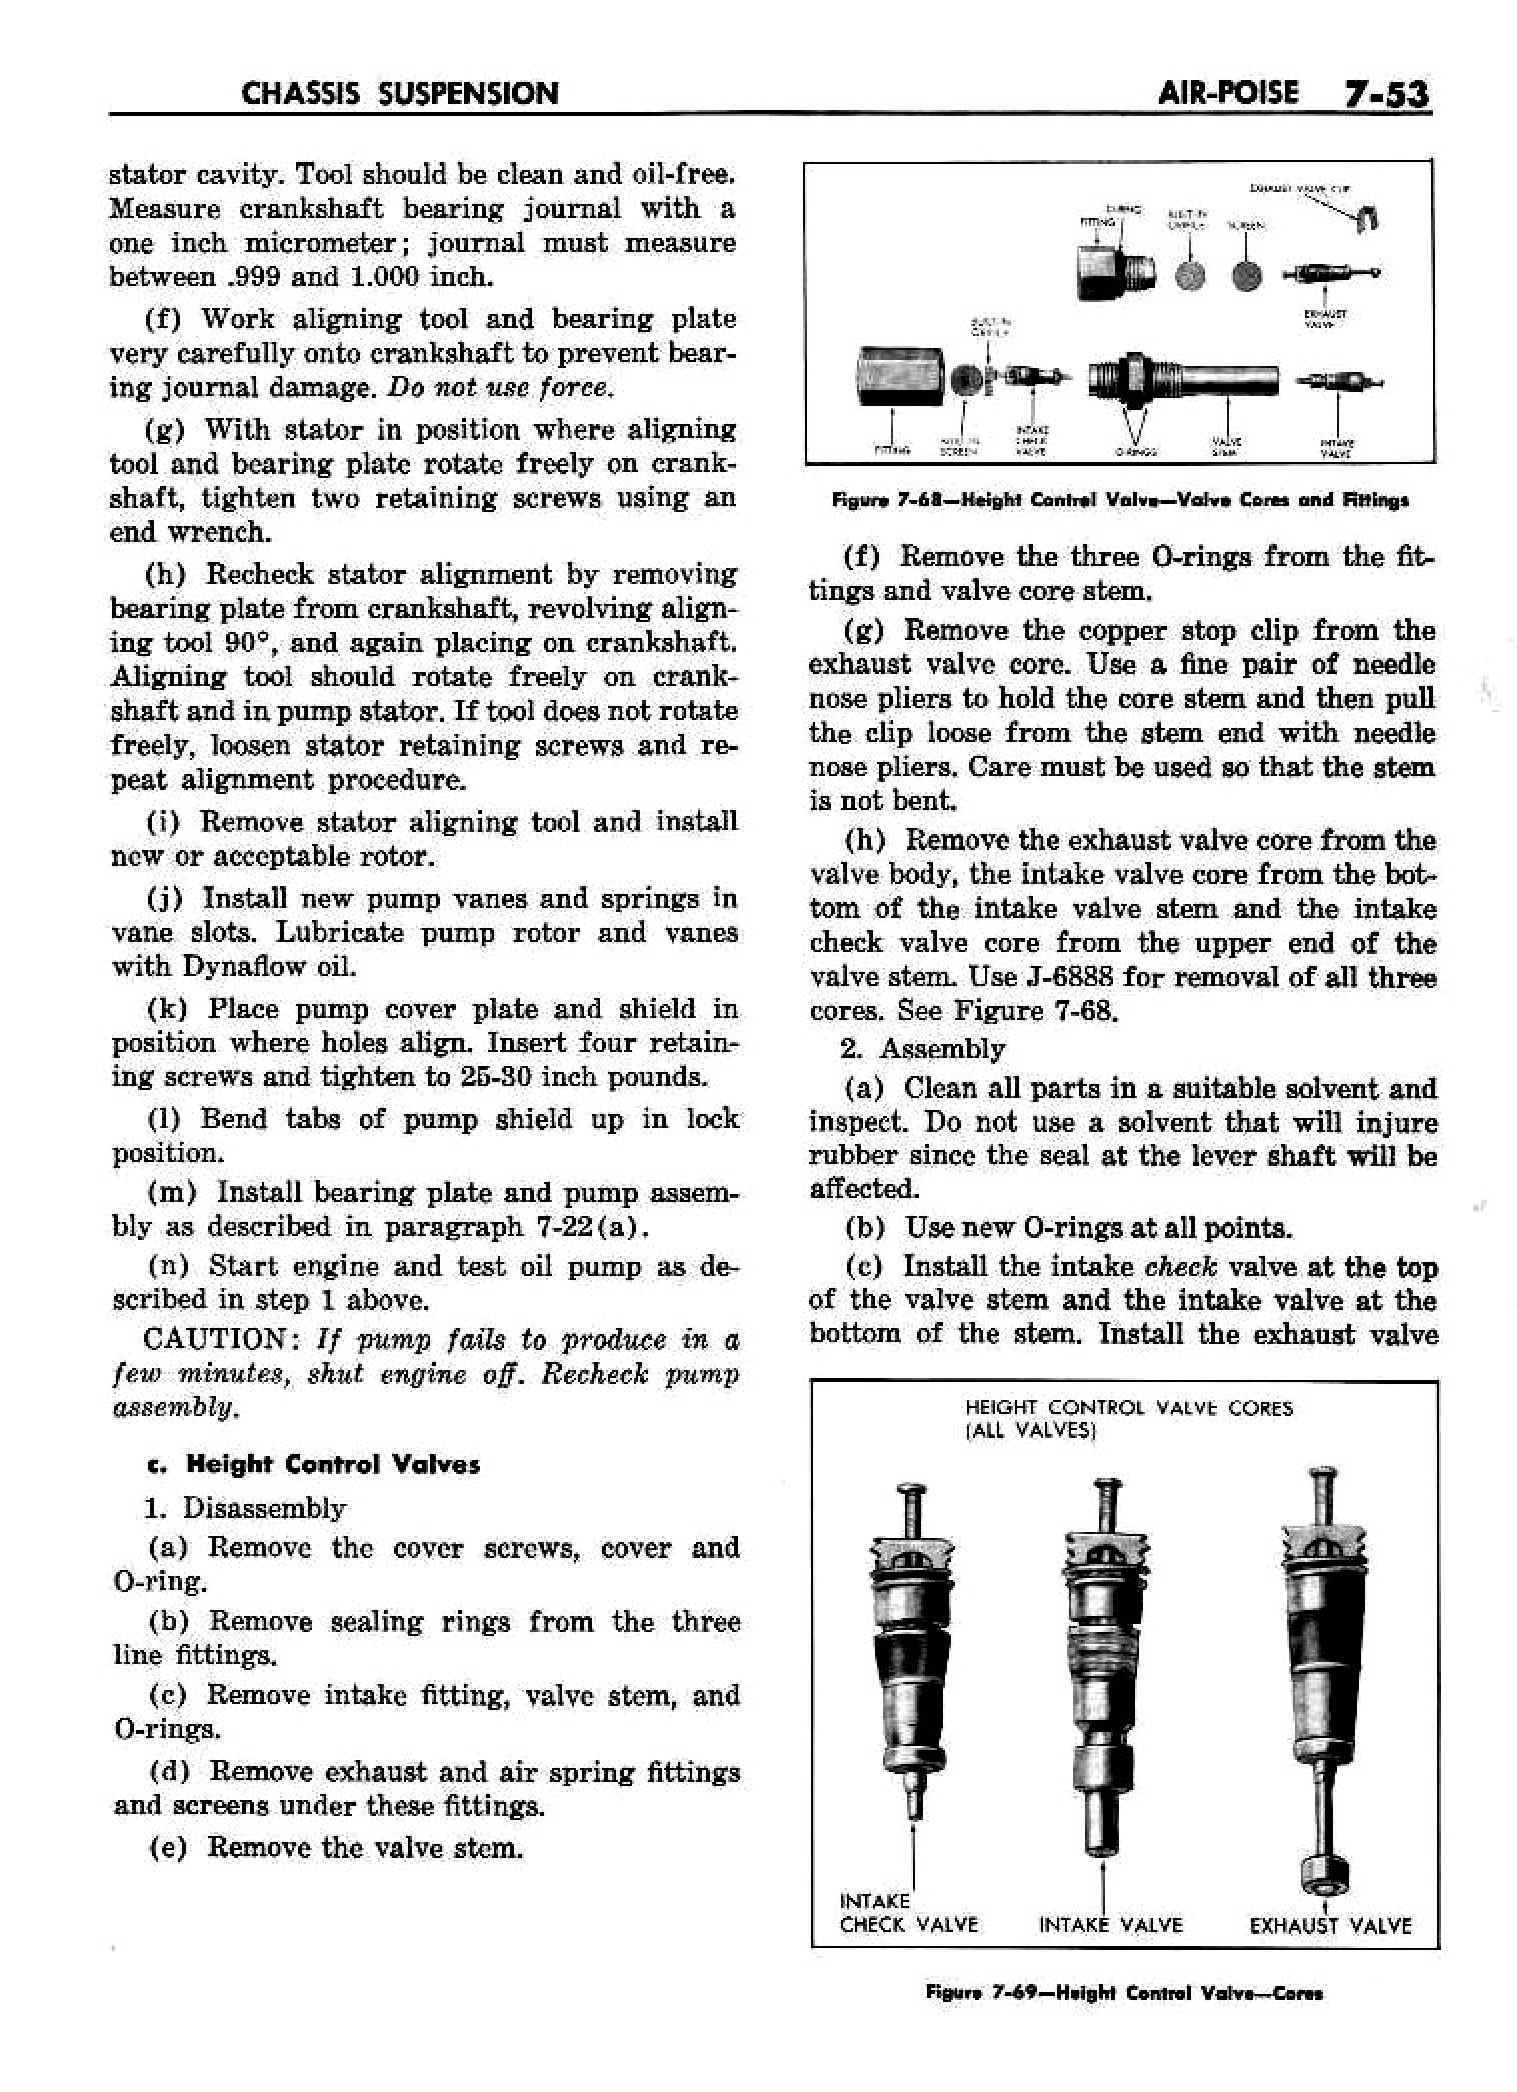 n_08 1958 Buick Shop Manual - Chassis Suspension_53.jpg